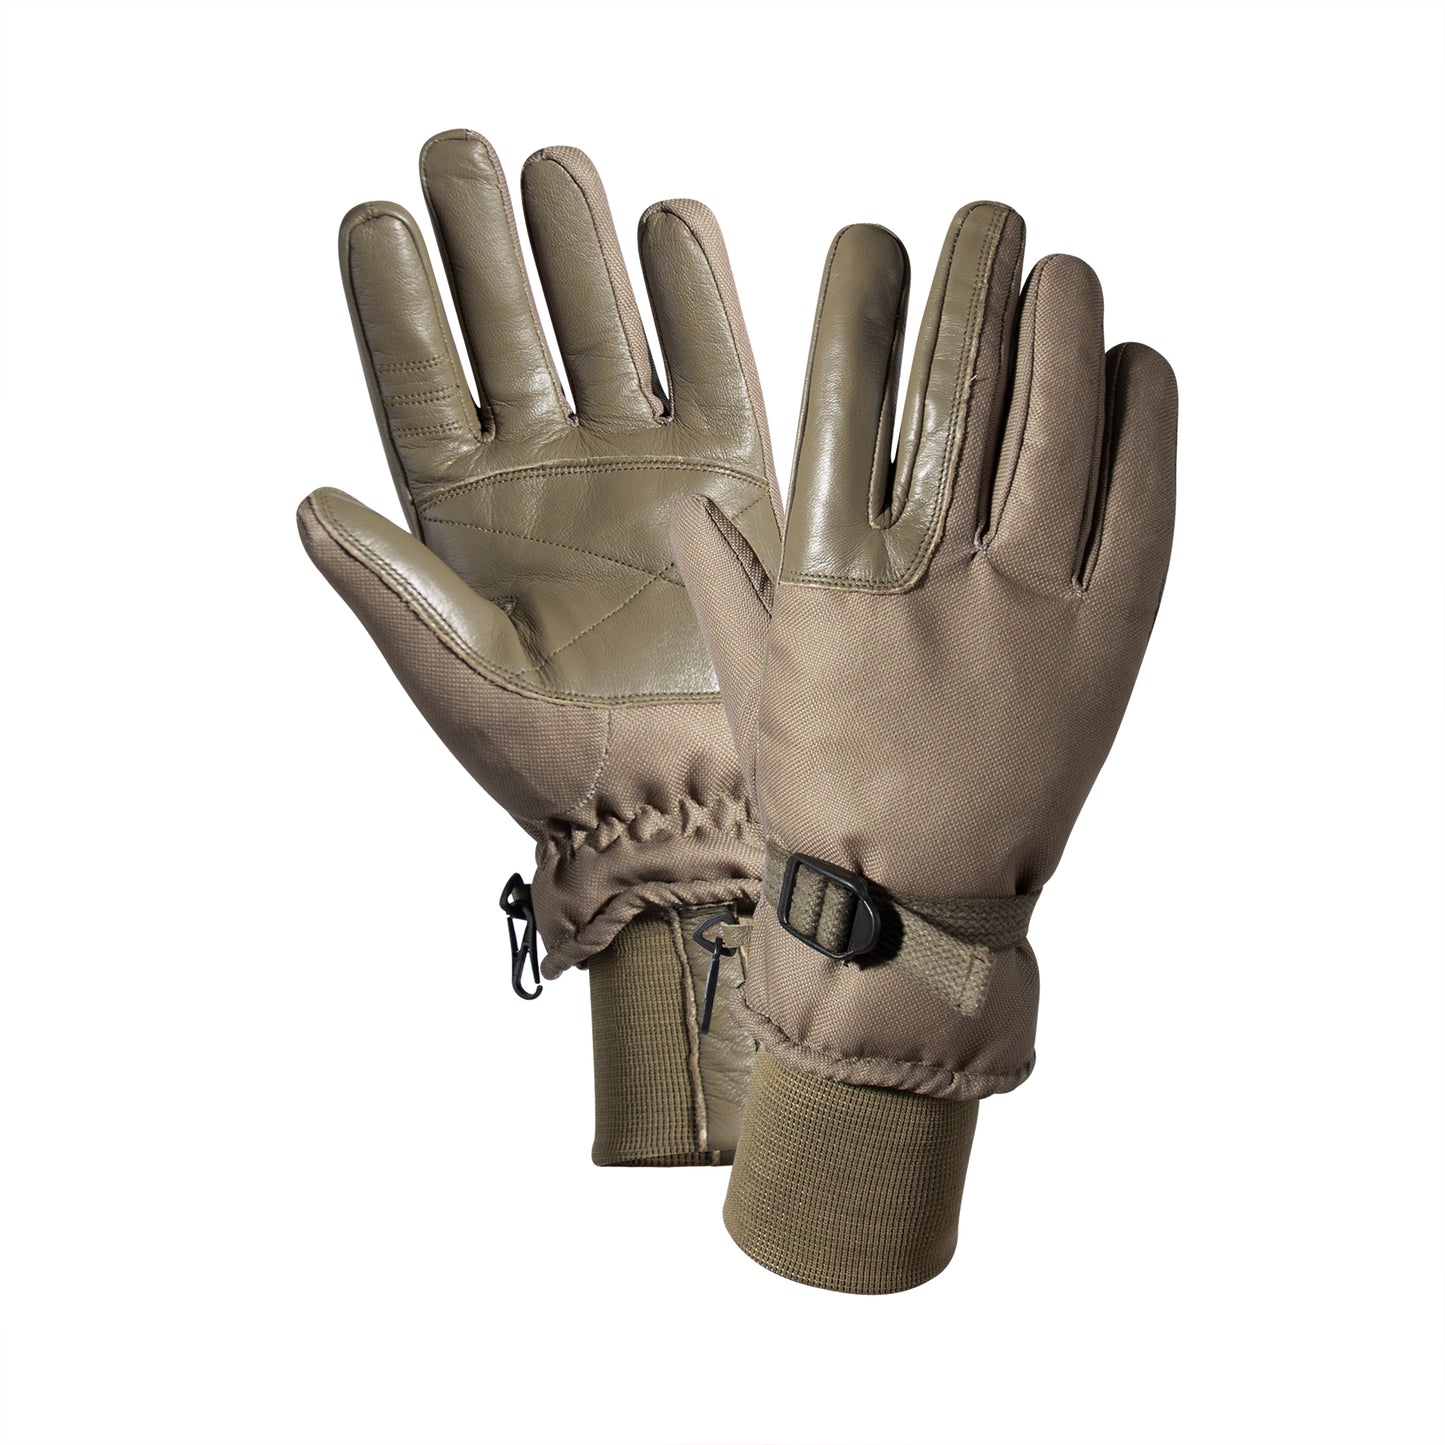 Milspec Cold Weather Military Gloves Cold Weather Gloves MilTac Tactical Military Outdoor Gear Australia